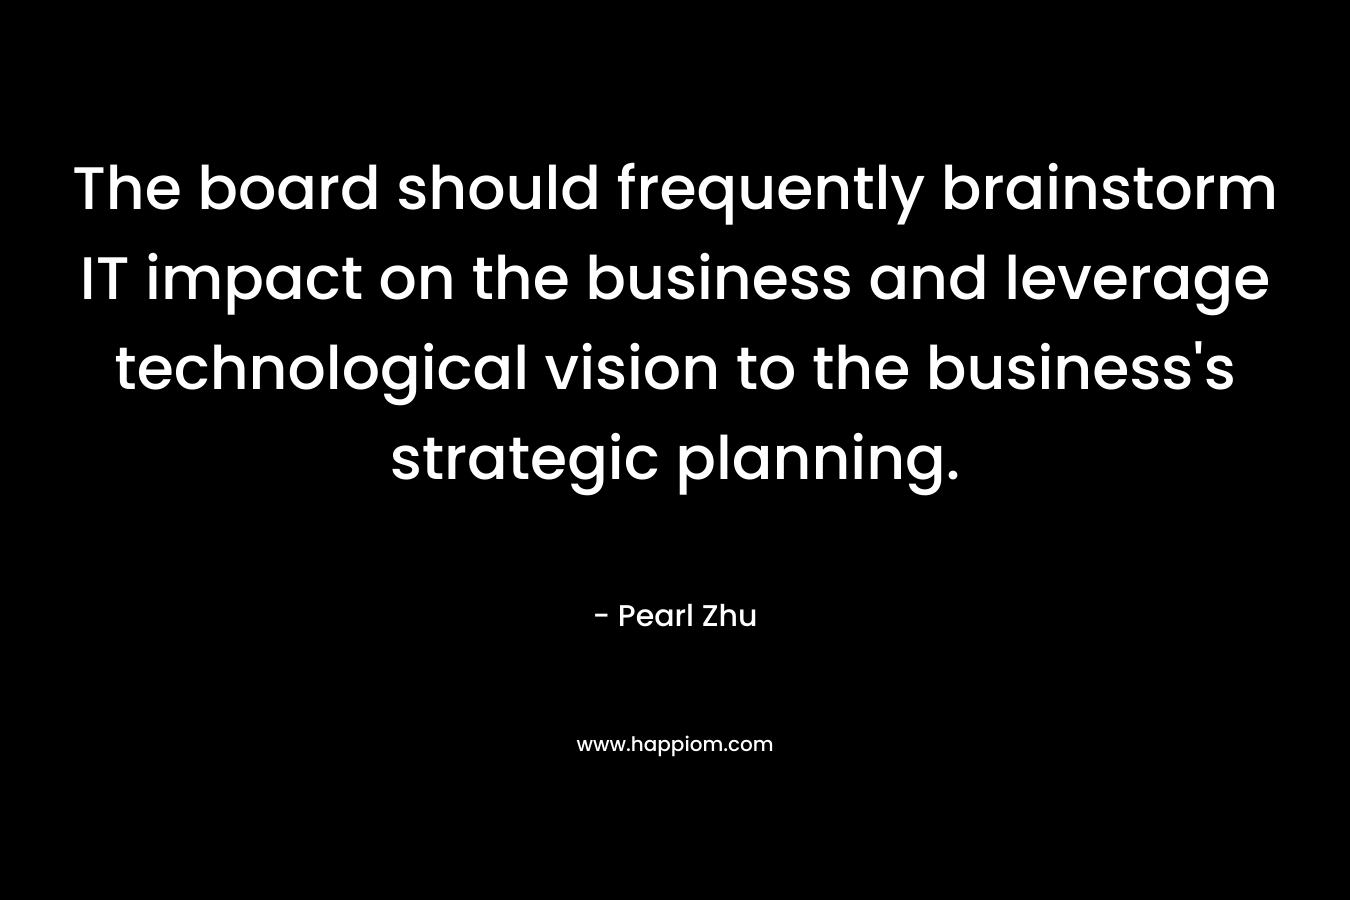 The board should frequently brainstorm IT impact on the business and leverage technological vision to the business's strategic planning.